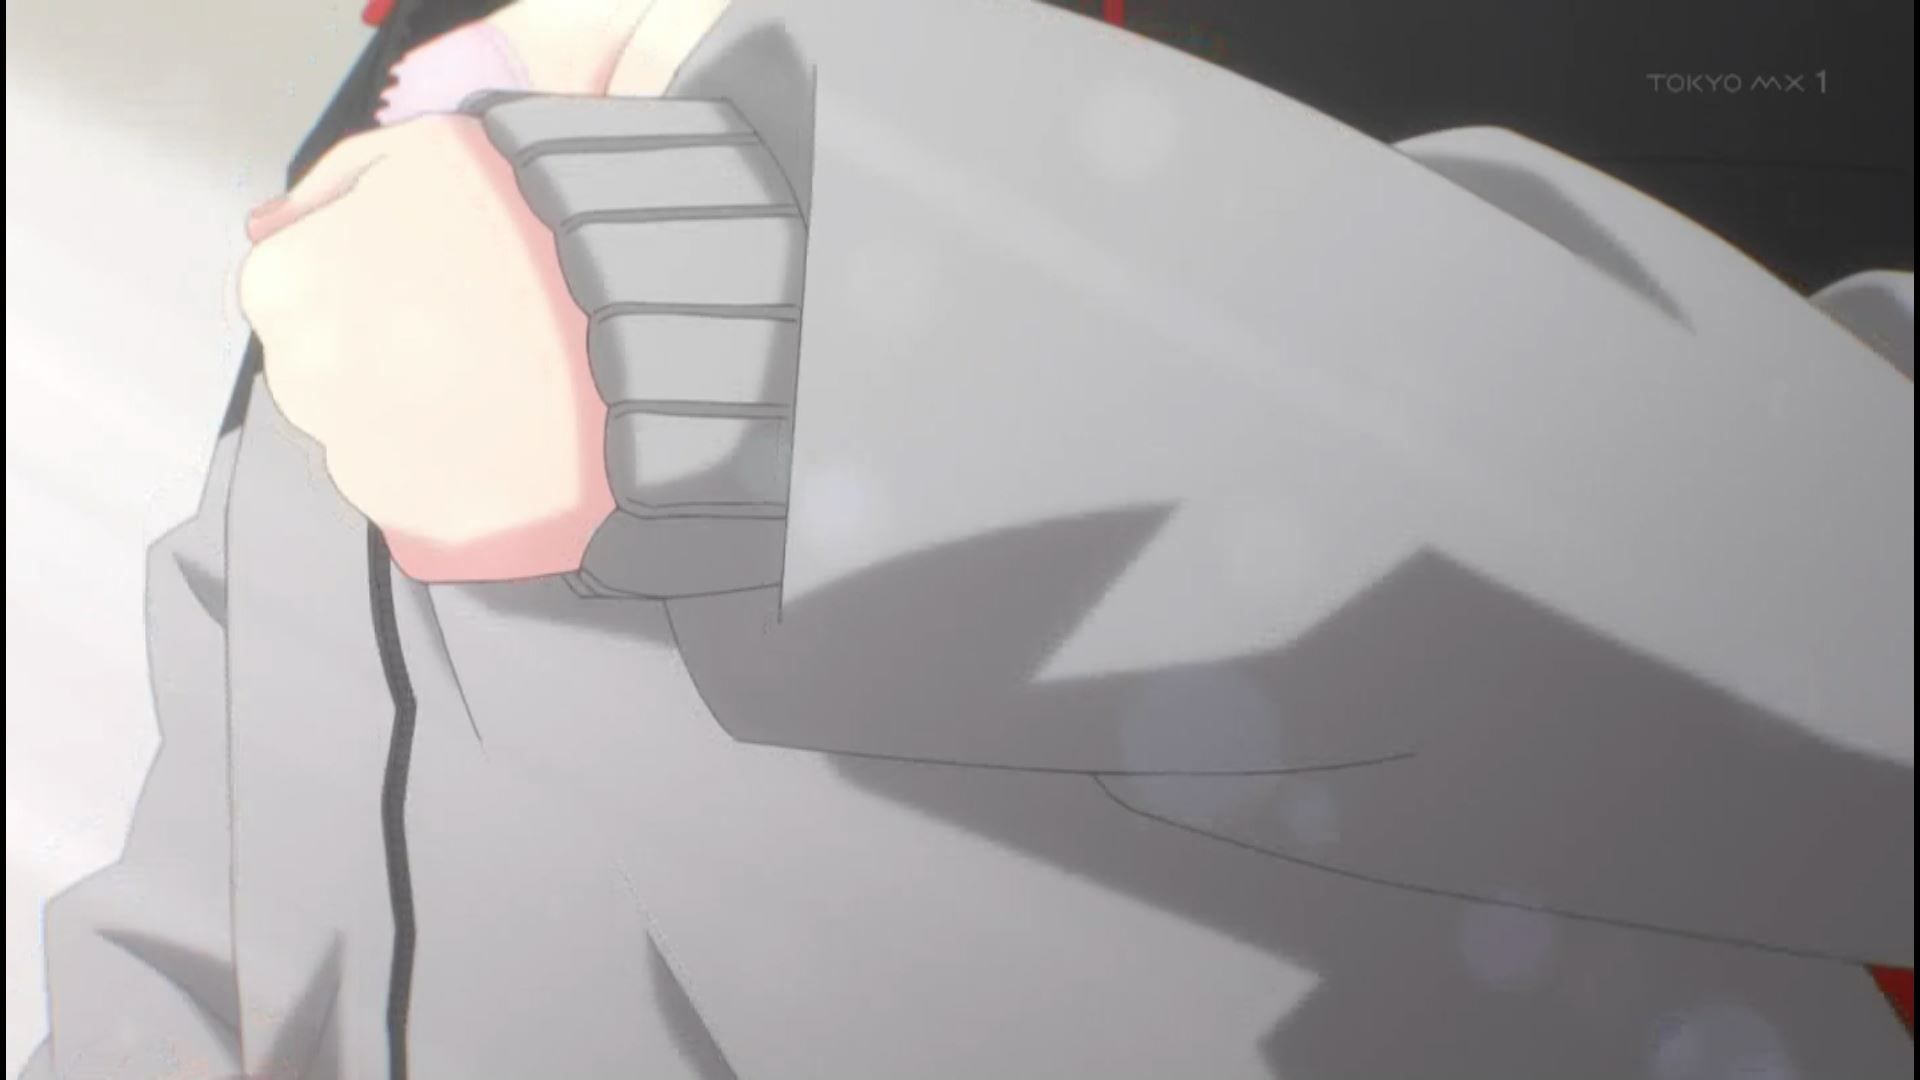 In the anime "Harlem Kyanpu!" episode 1, a girl stays in her uncle's tent and is attacked 3